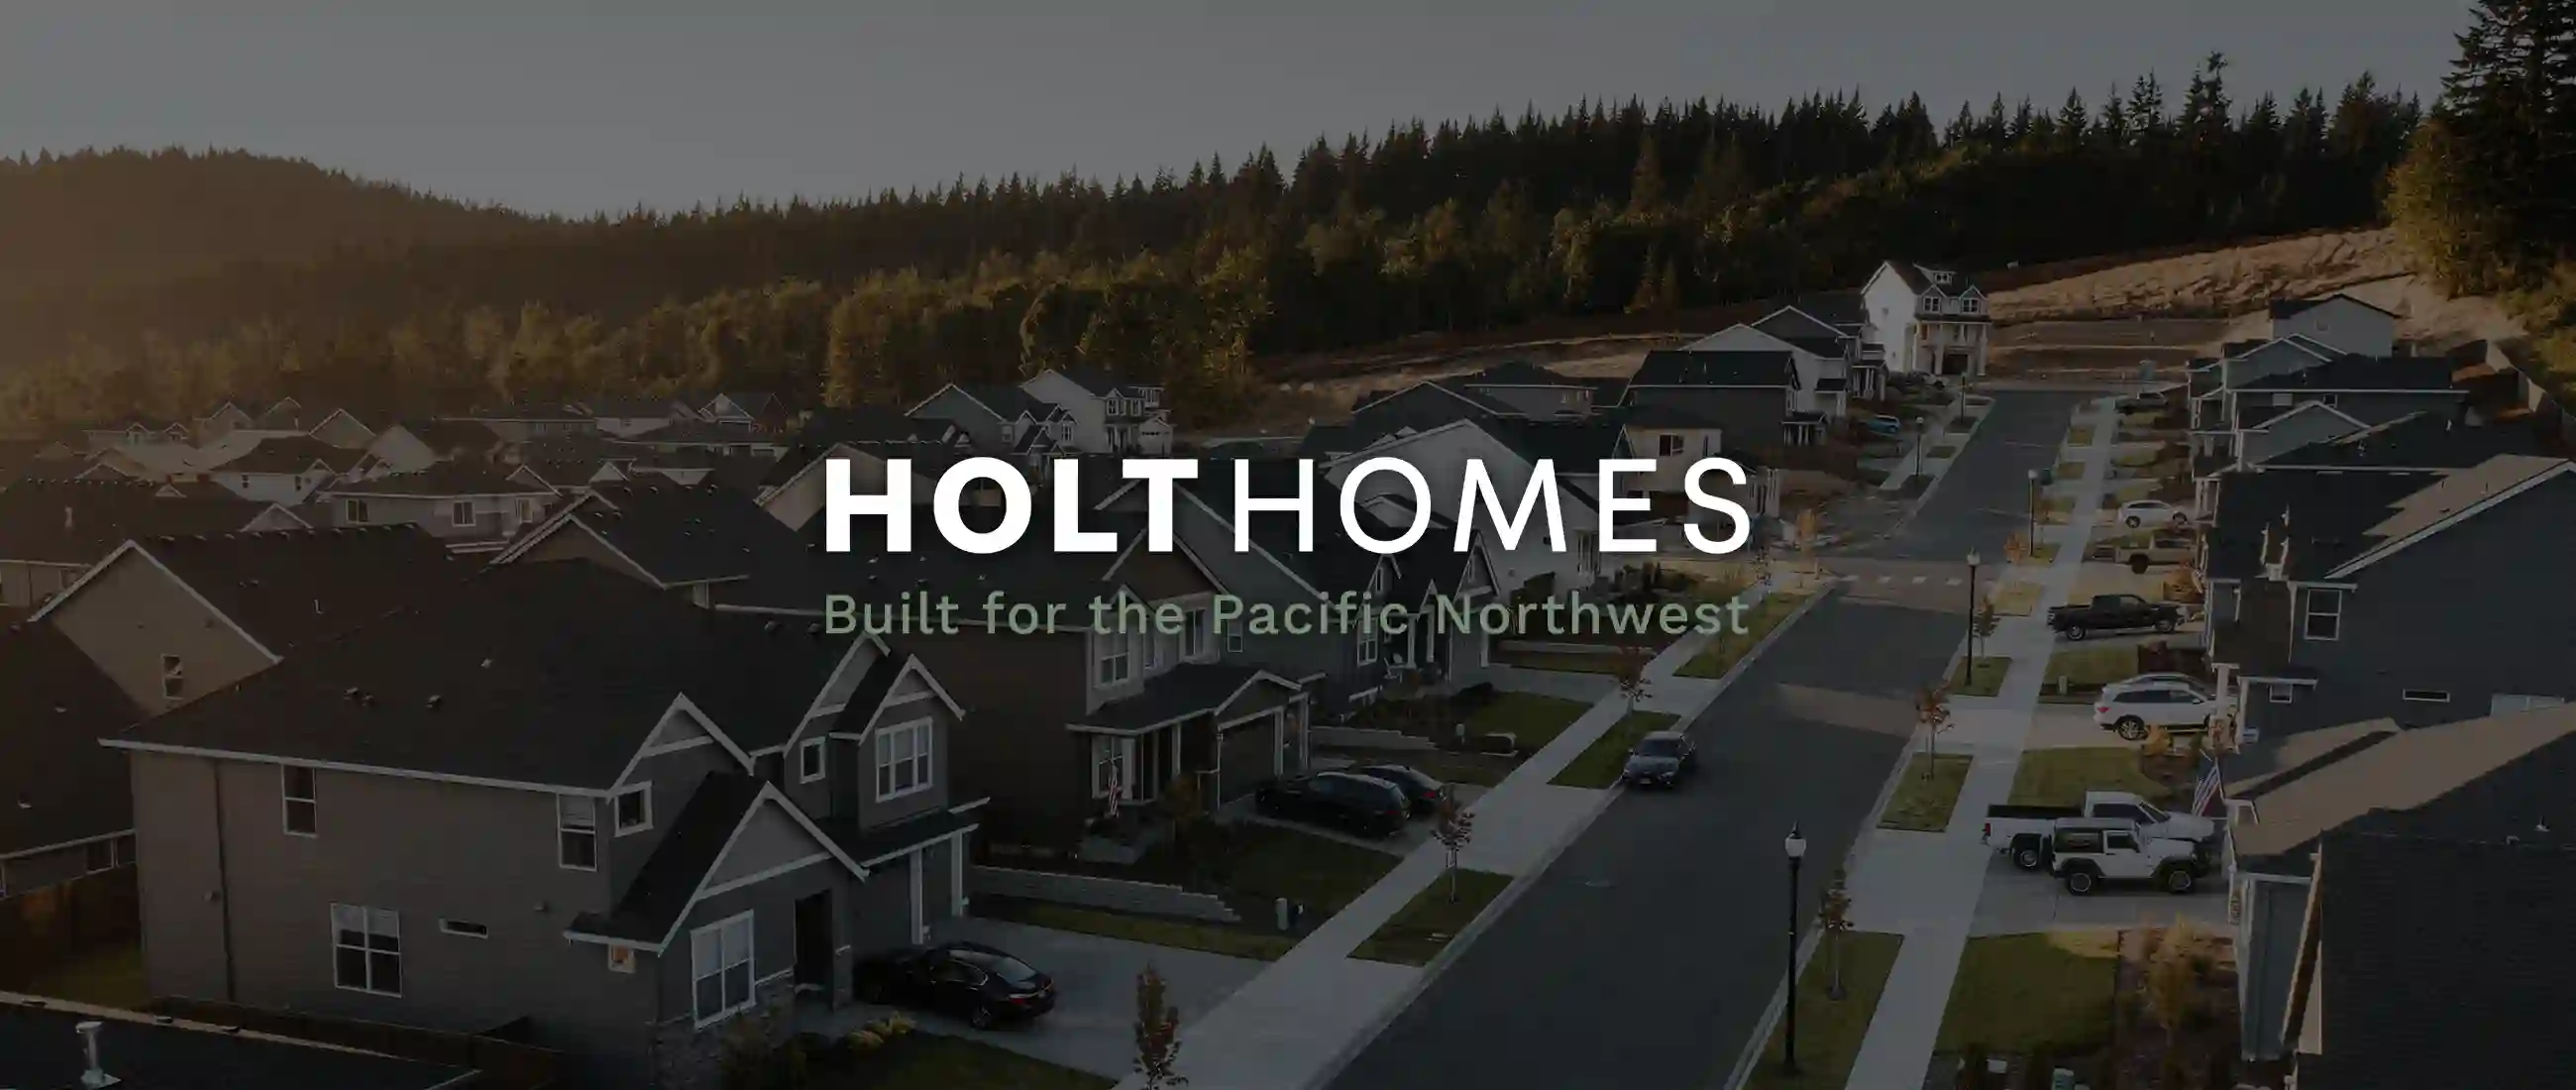 Home-builder-community-with-Holt-Homes-logo-over-the-top-10